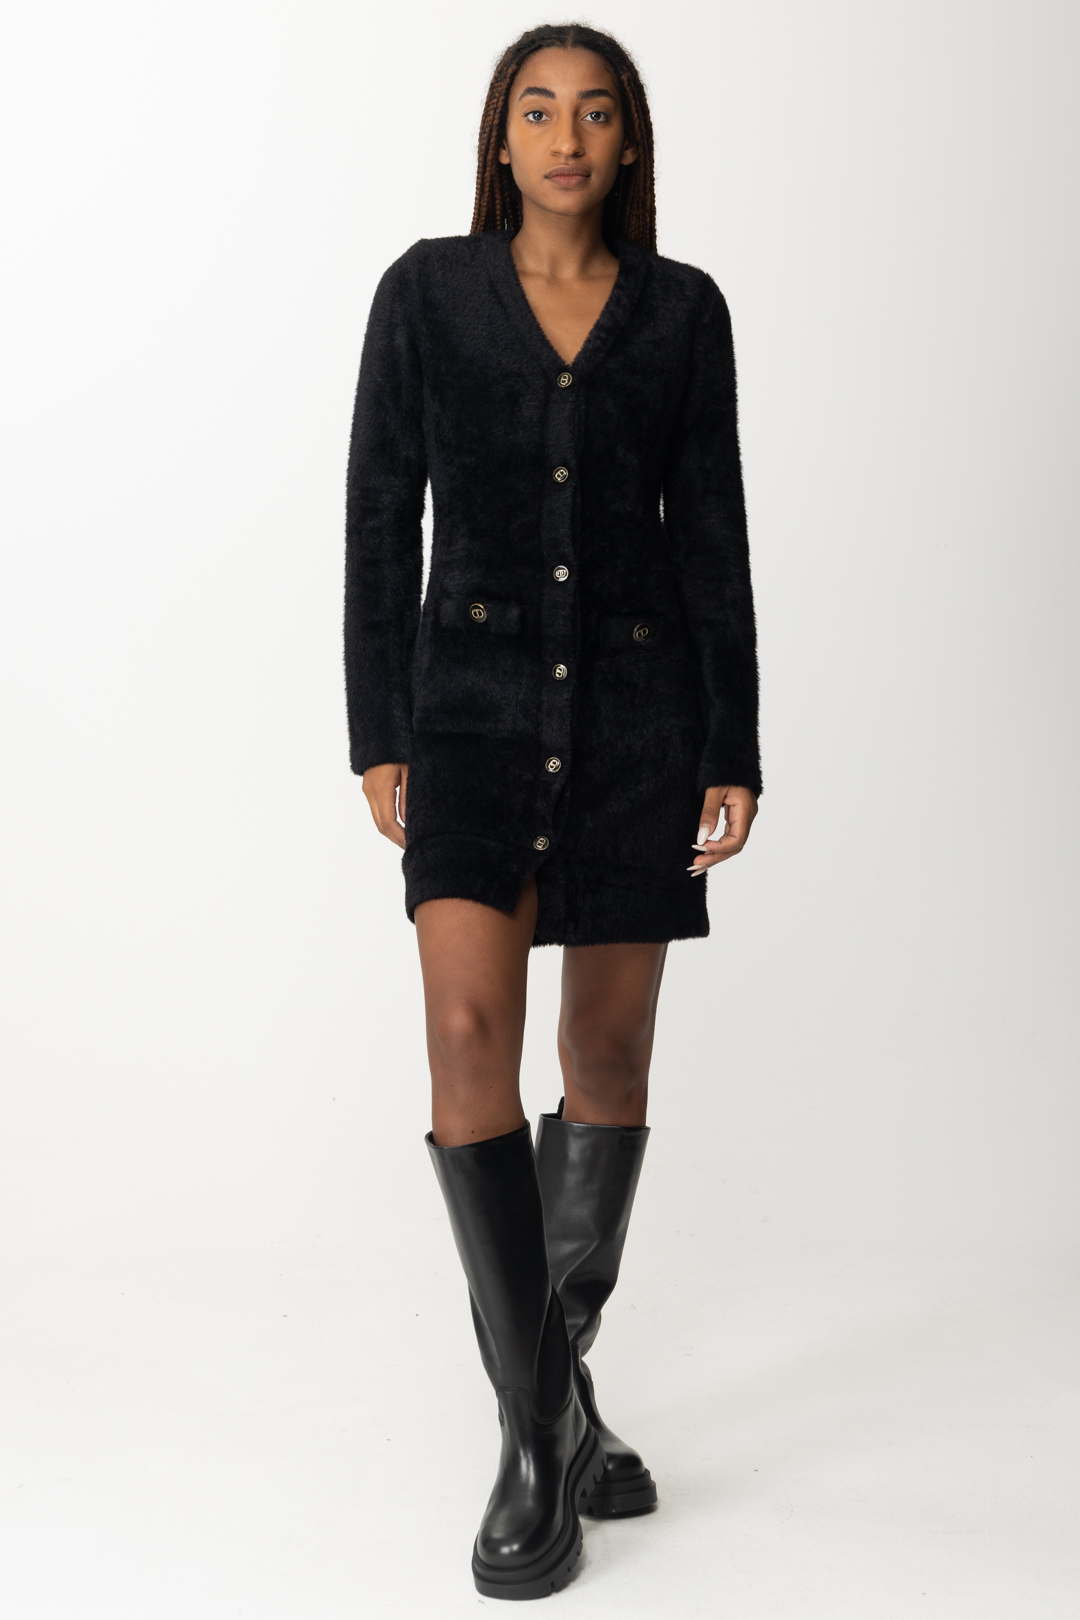 Preview: Twin-Set Knit dress with logoed buttons Nero